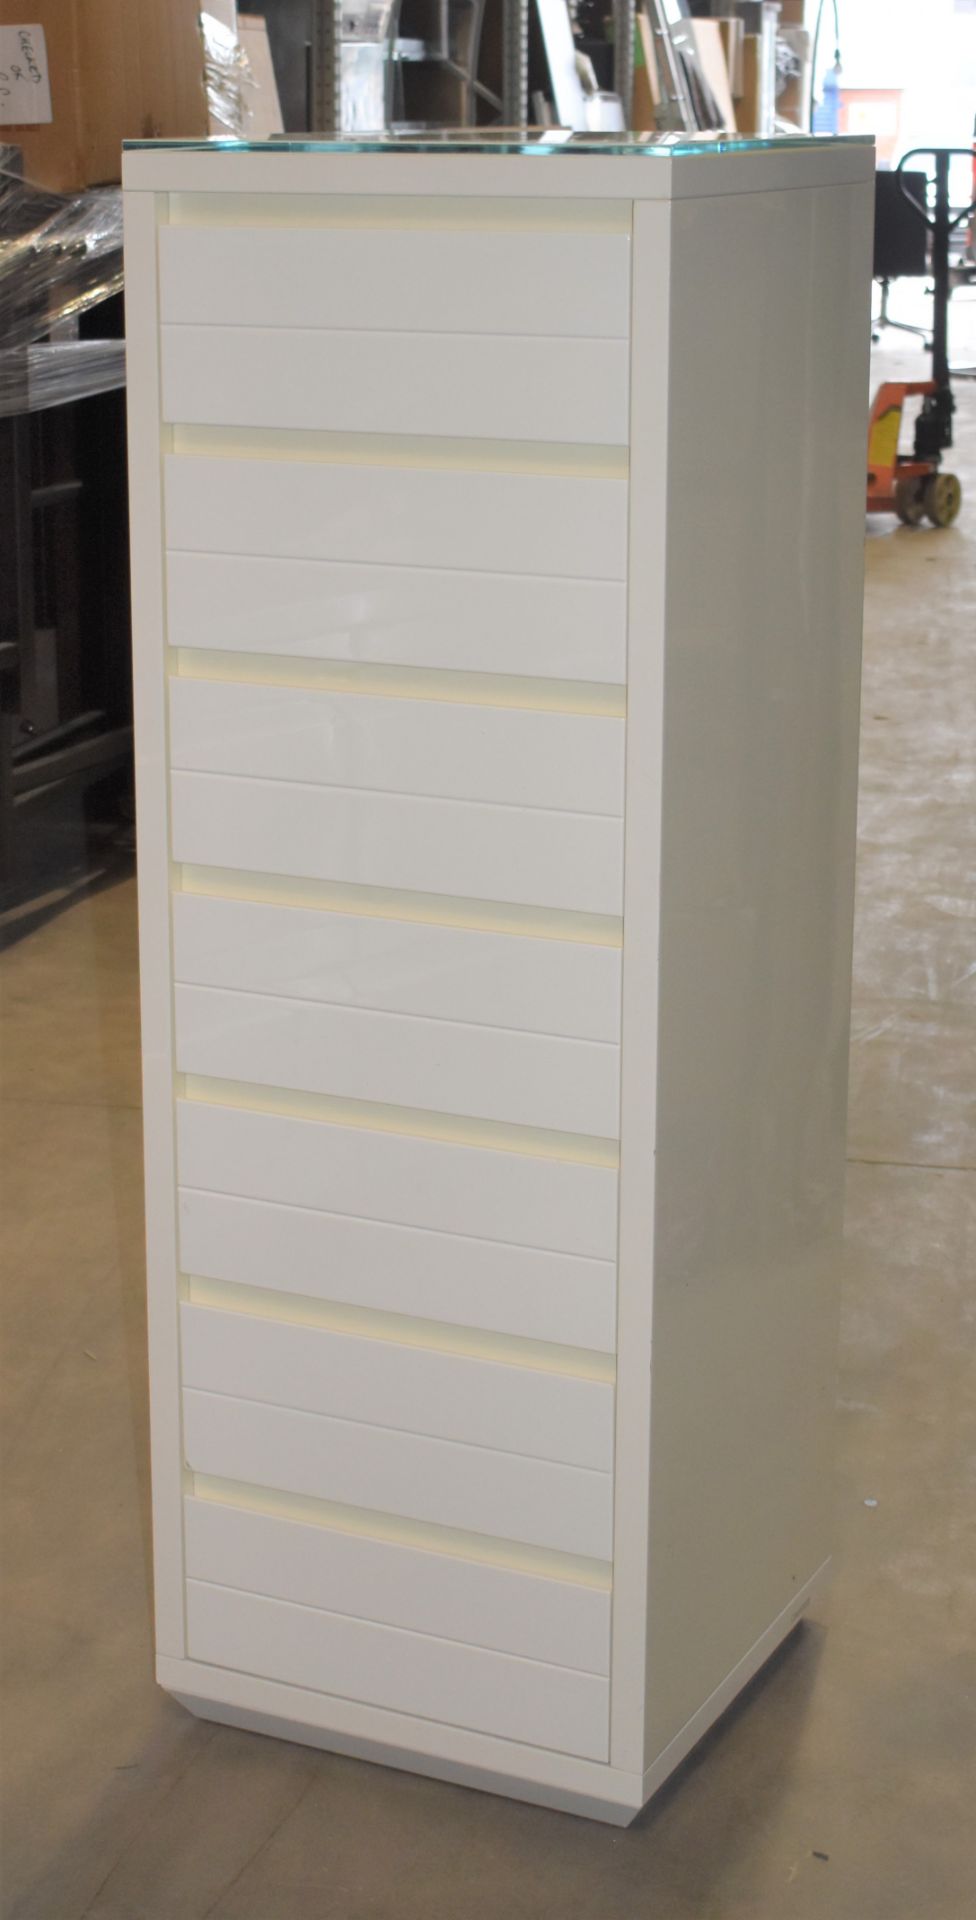 1 x Set of Seven Casabella Adria Bedroom Drawers - White Gloss With Glass Top and Soft Close Drawers